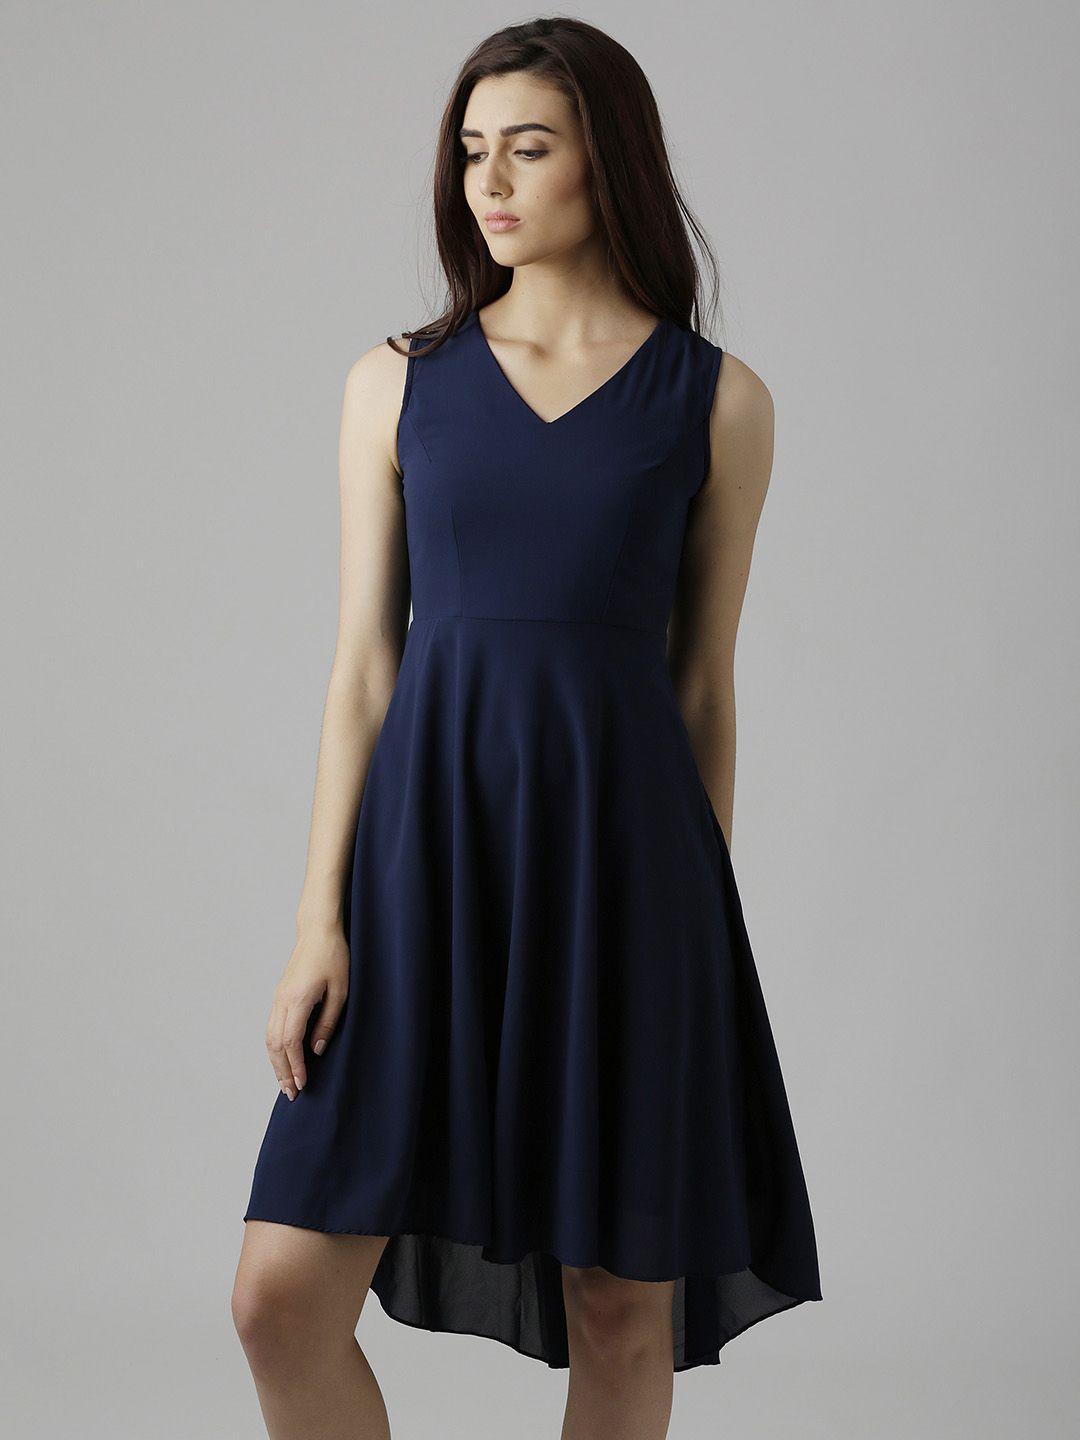 miss-chase-women-navy-blue-solid-fit-and-flare-dress